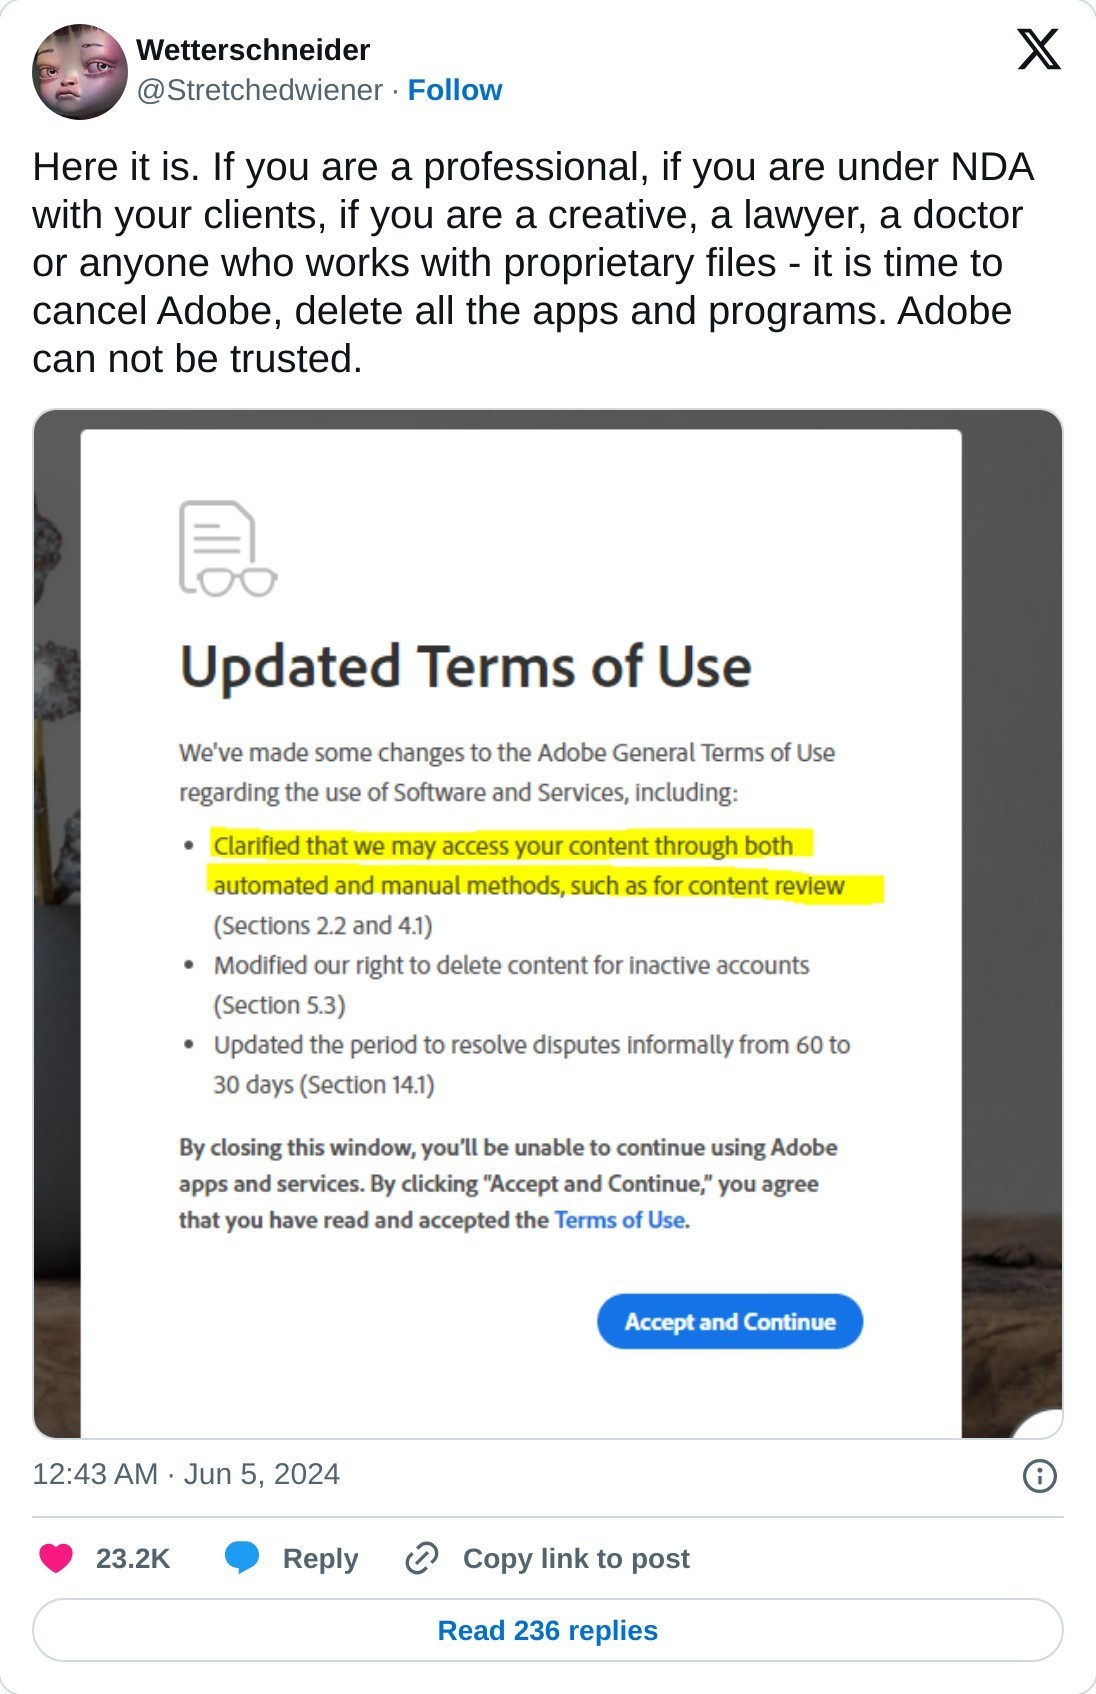 Here it is. If you are a professional, if you are under NDA with your clients, if you are a creative, a lawyer, a doctor or anyone who works with proprietary files - it is time to cancel Adobe, delete all the apps and programs. Adobe can not be trusted. pic.twitter.com/LFnBbDKWLC  — Wetterschneider (@Stretchedwiener) June 5, 2024